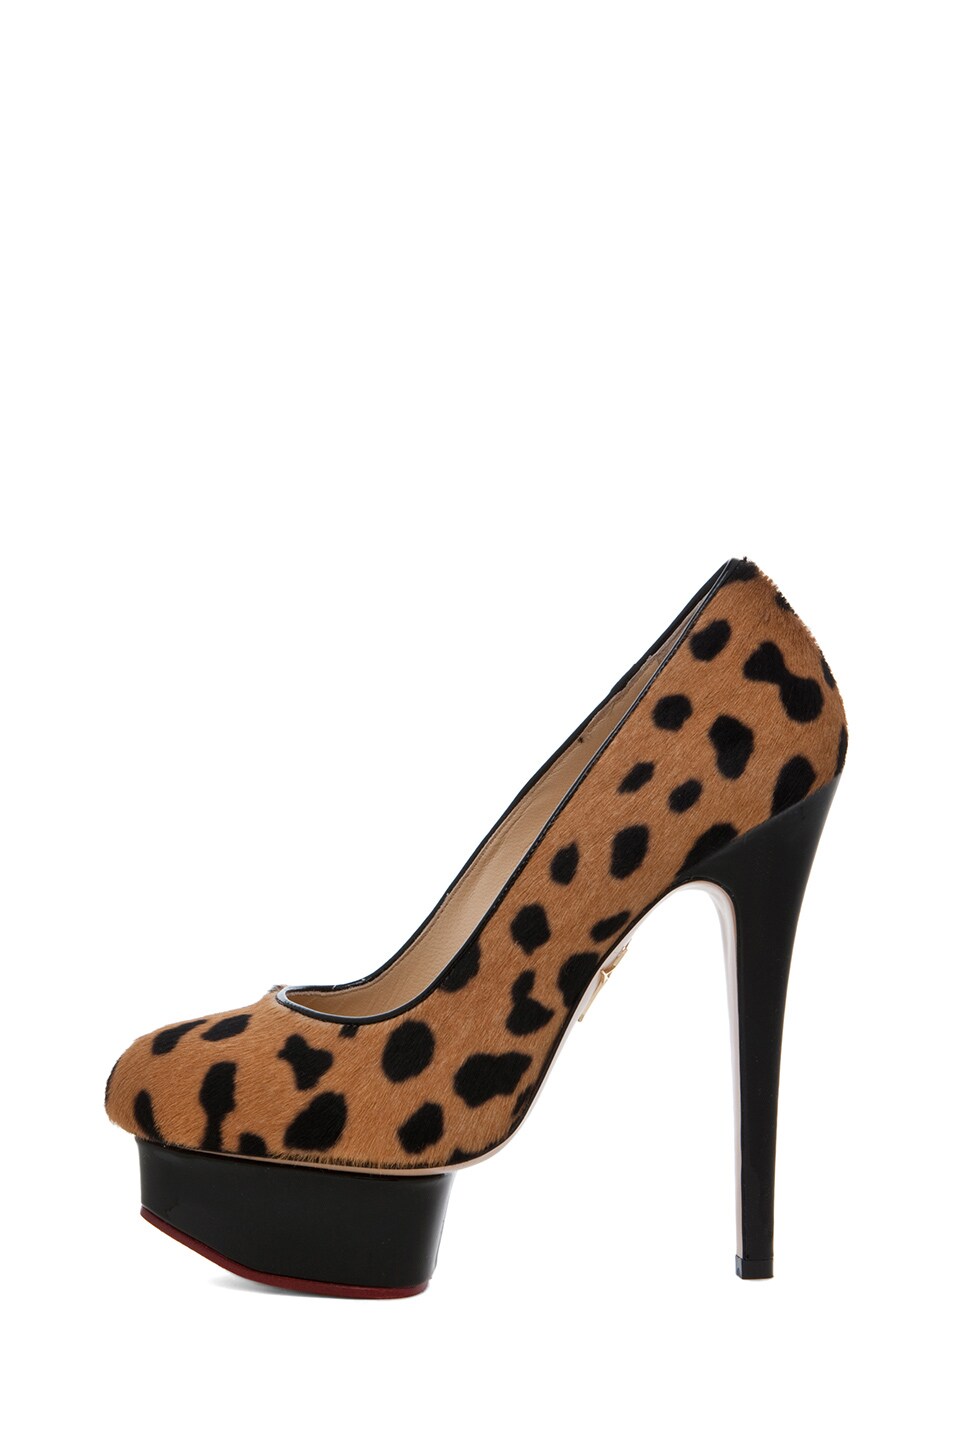 Image 1 of Charlotte Olympia Polly Calf Hair Pump in Hyena Black